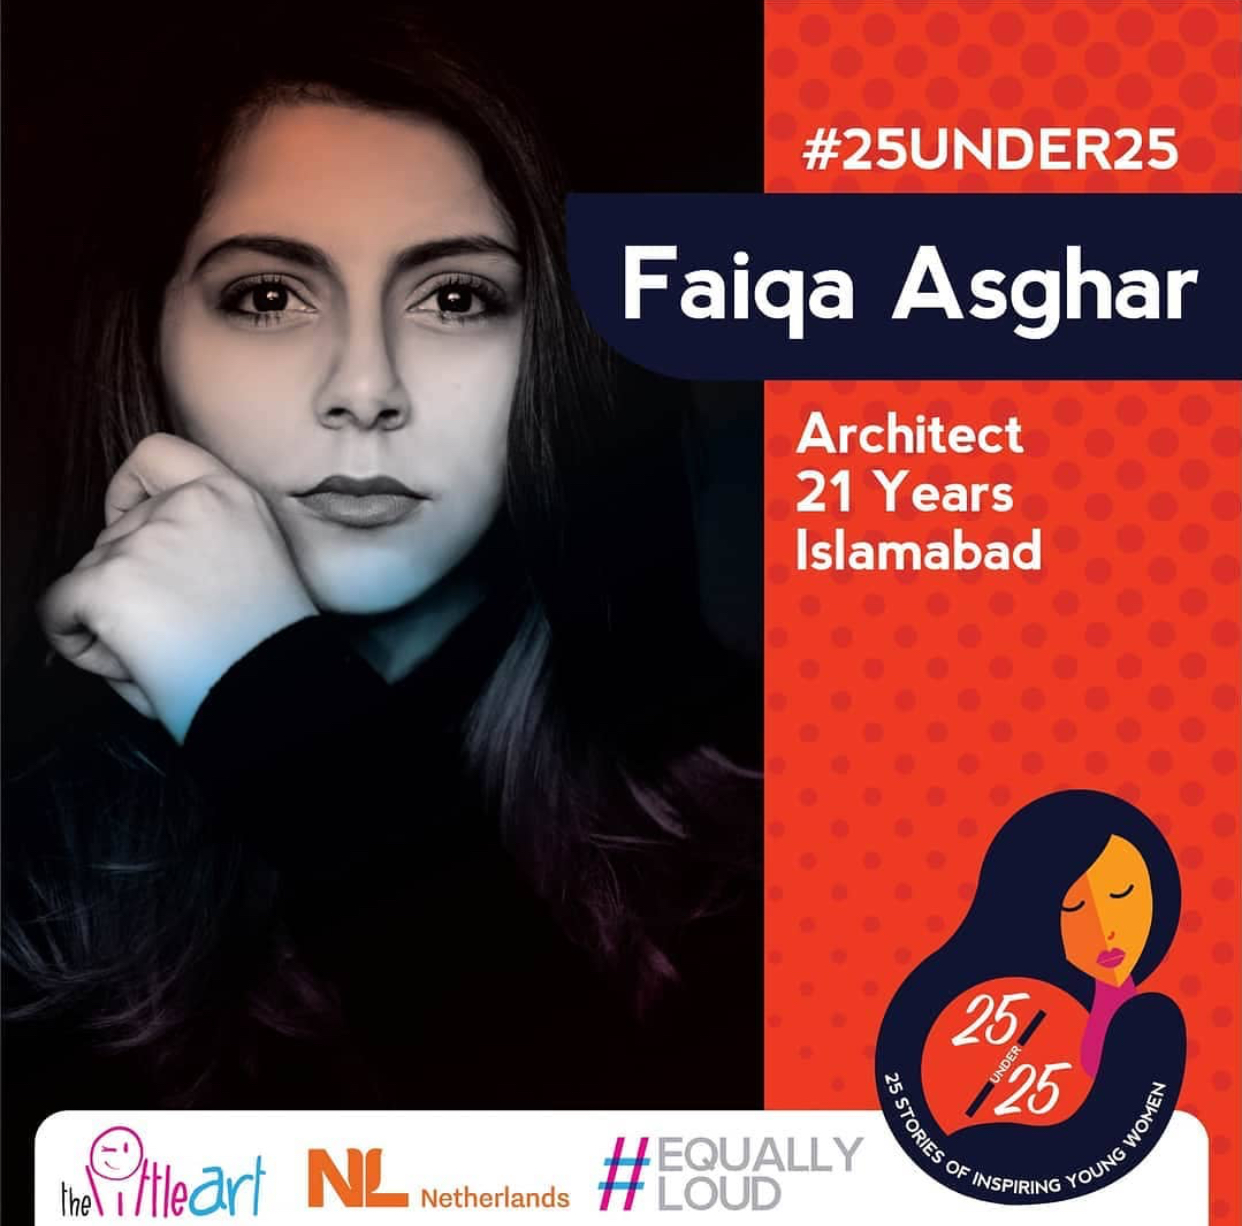 Young architect becomes the face of Pakistan globally with a ‘Top Talents under 25’ award